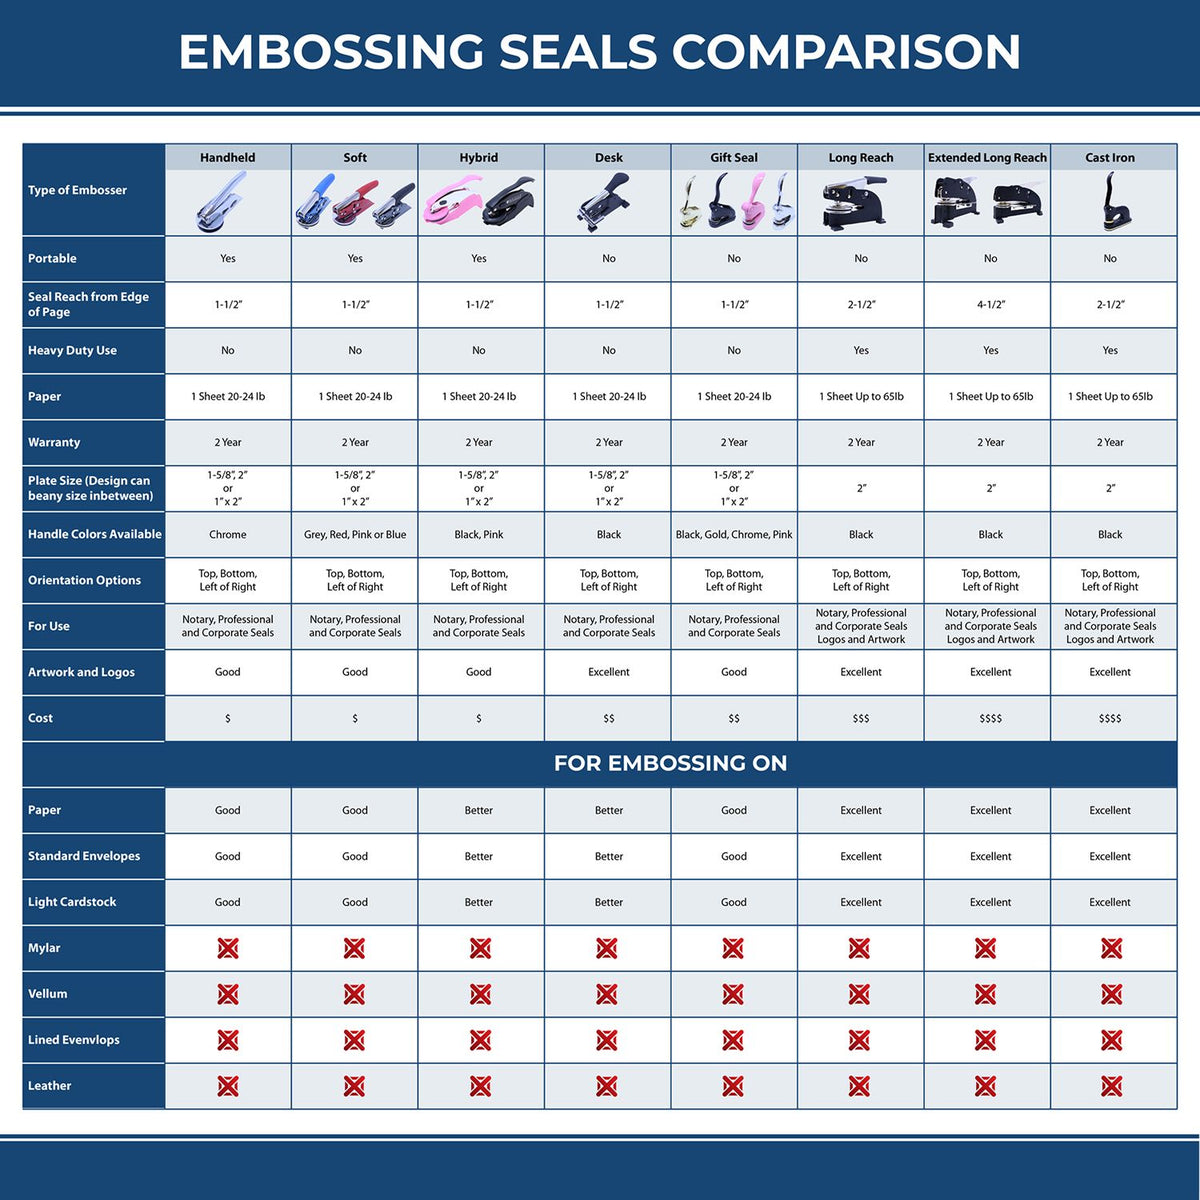 A comparison chart for the different types of mount models available for the Long Reach Louisiana PE Seal.